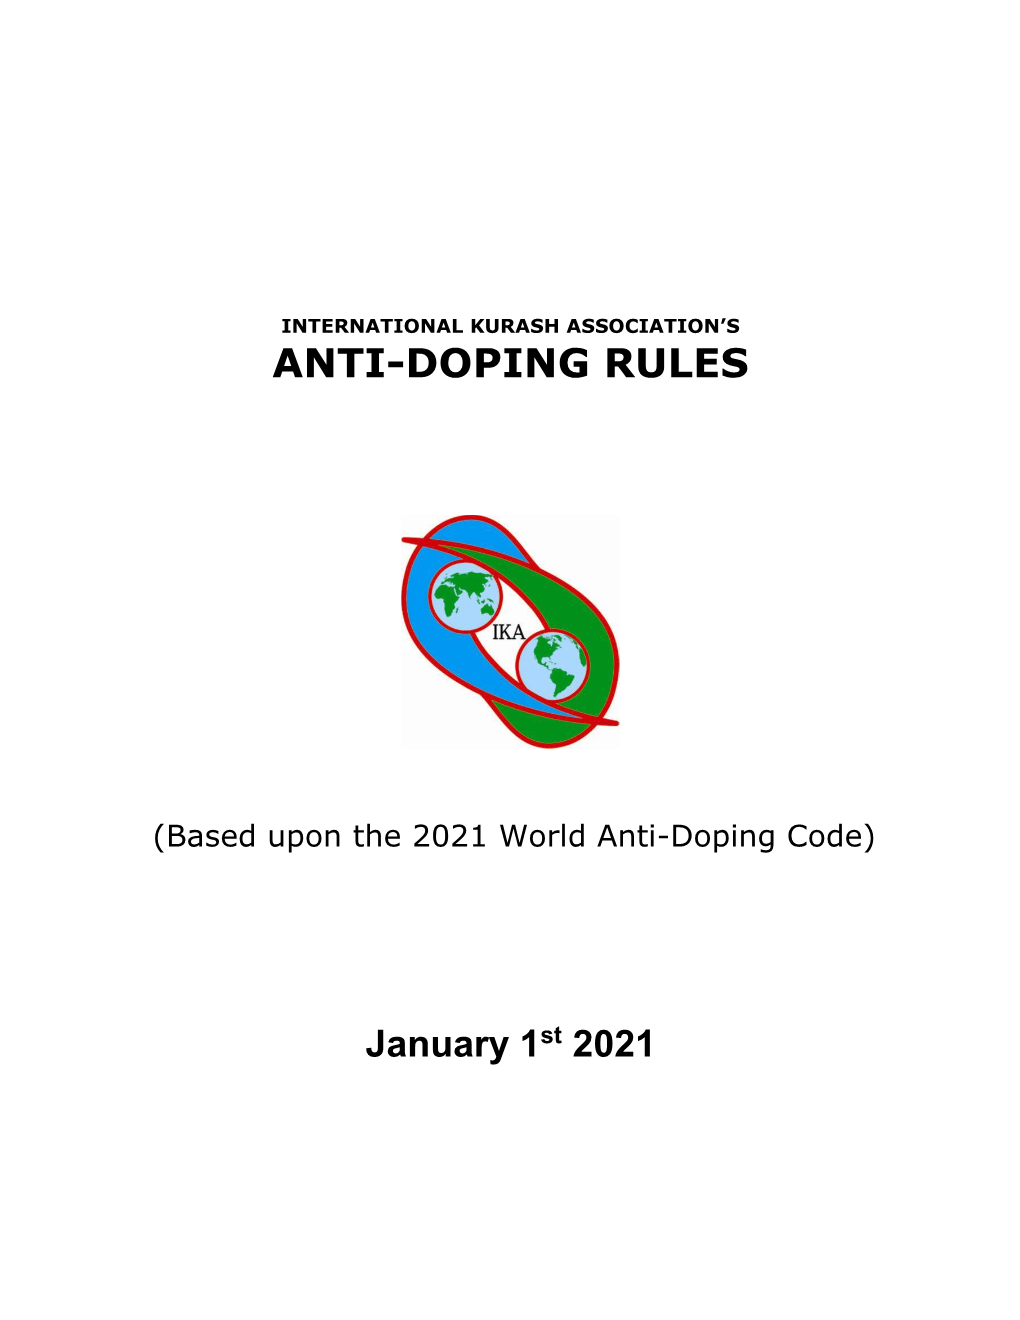 Anti-Doping Rules